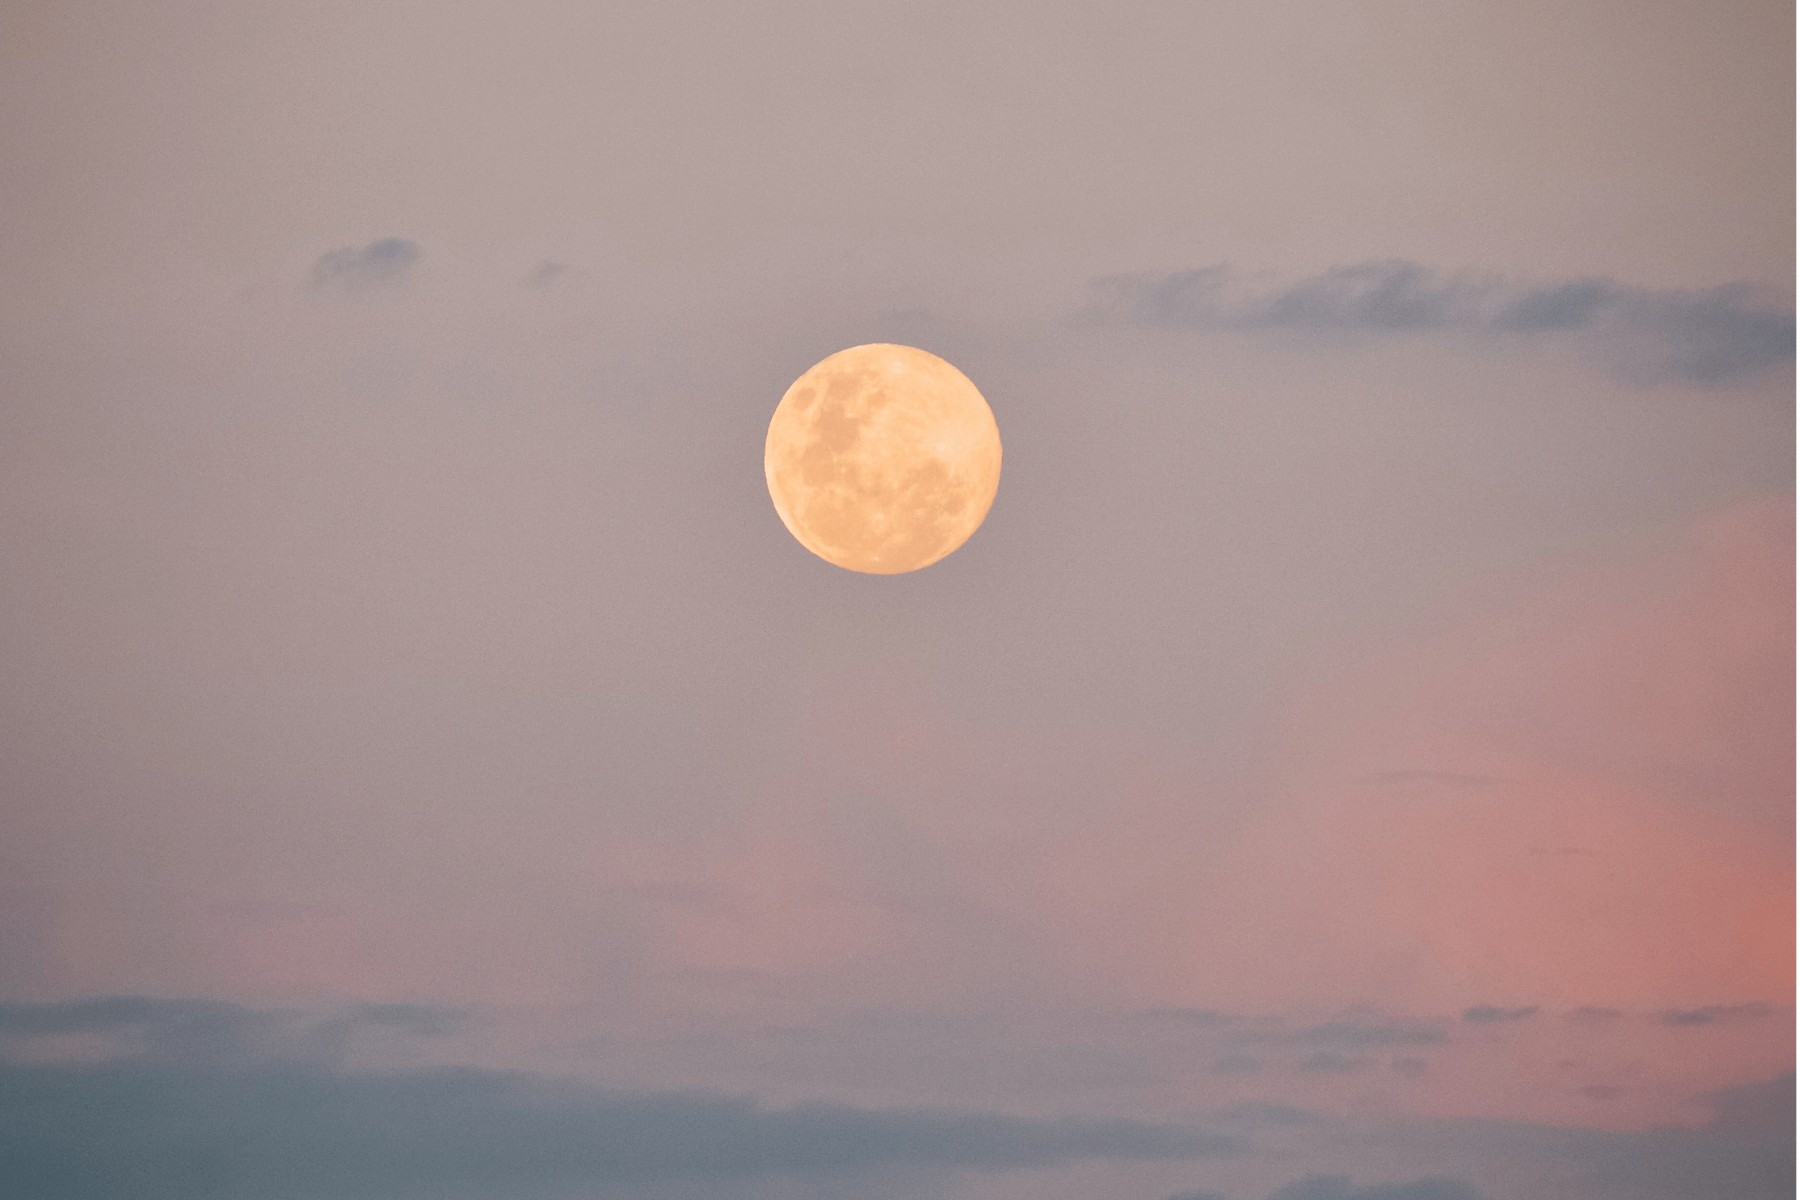 New Moon and Full Moon - What's the Difference?